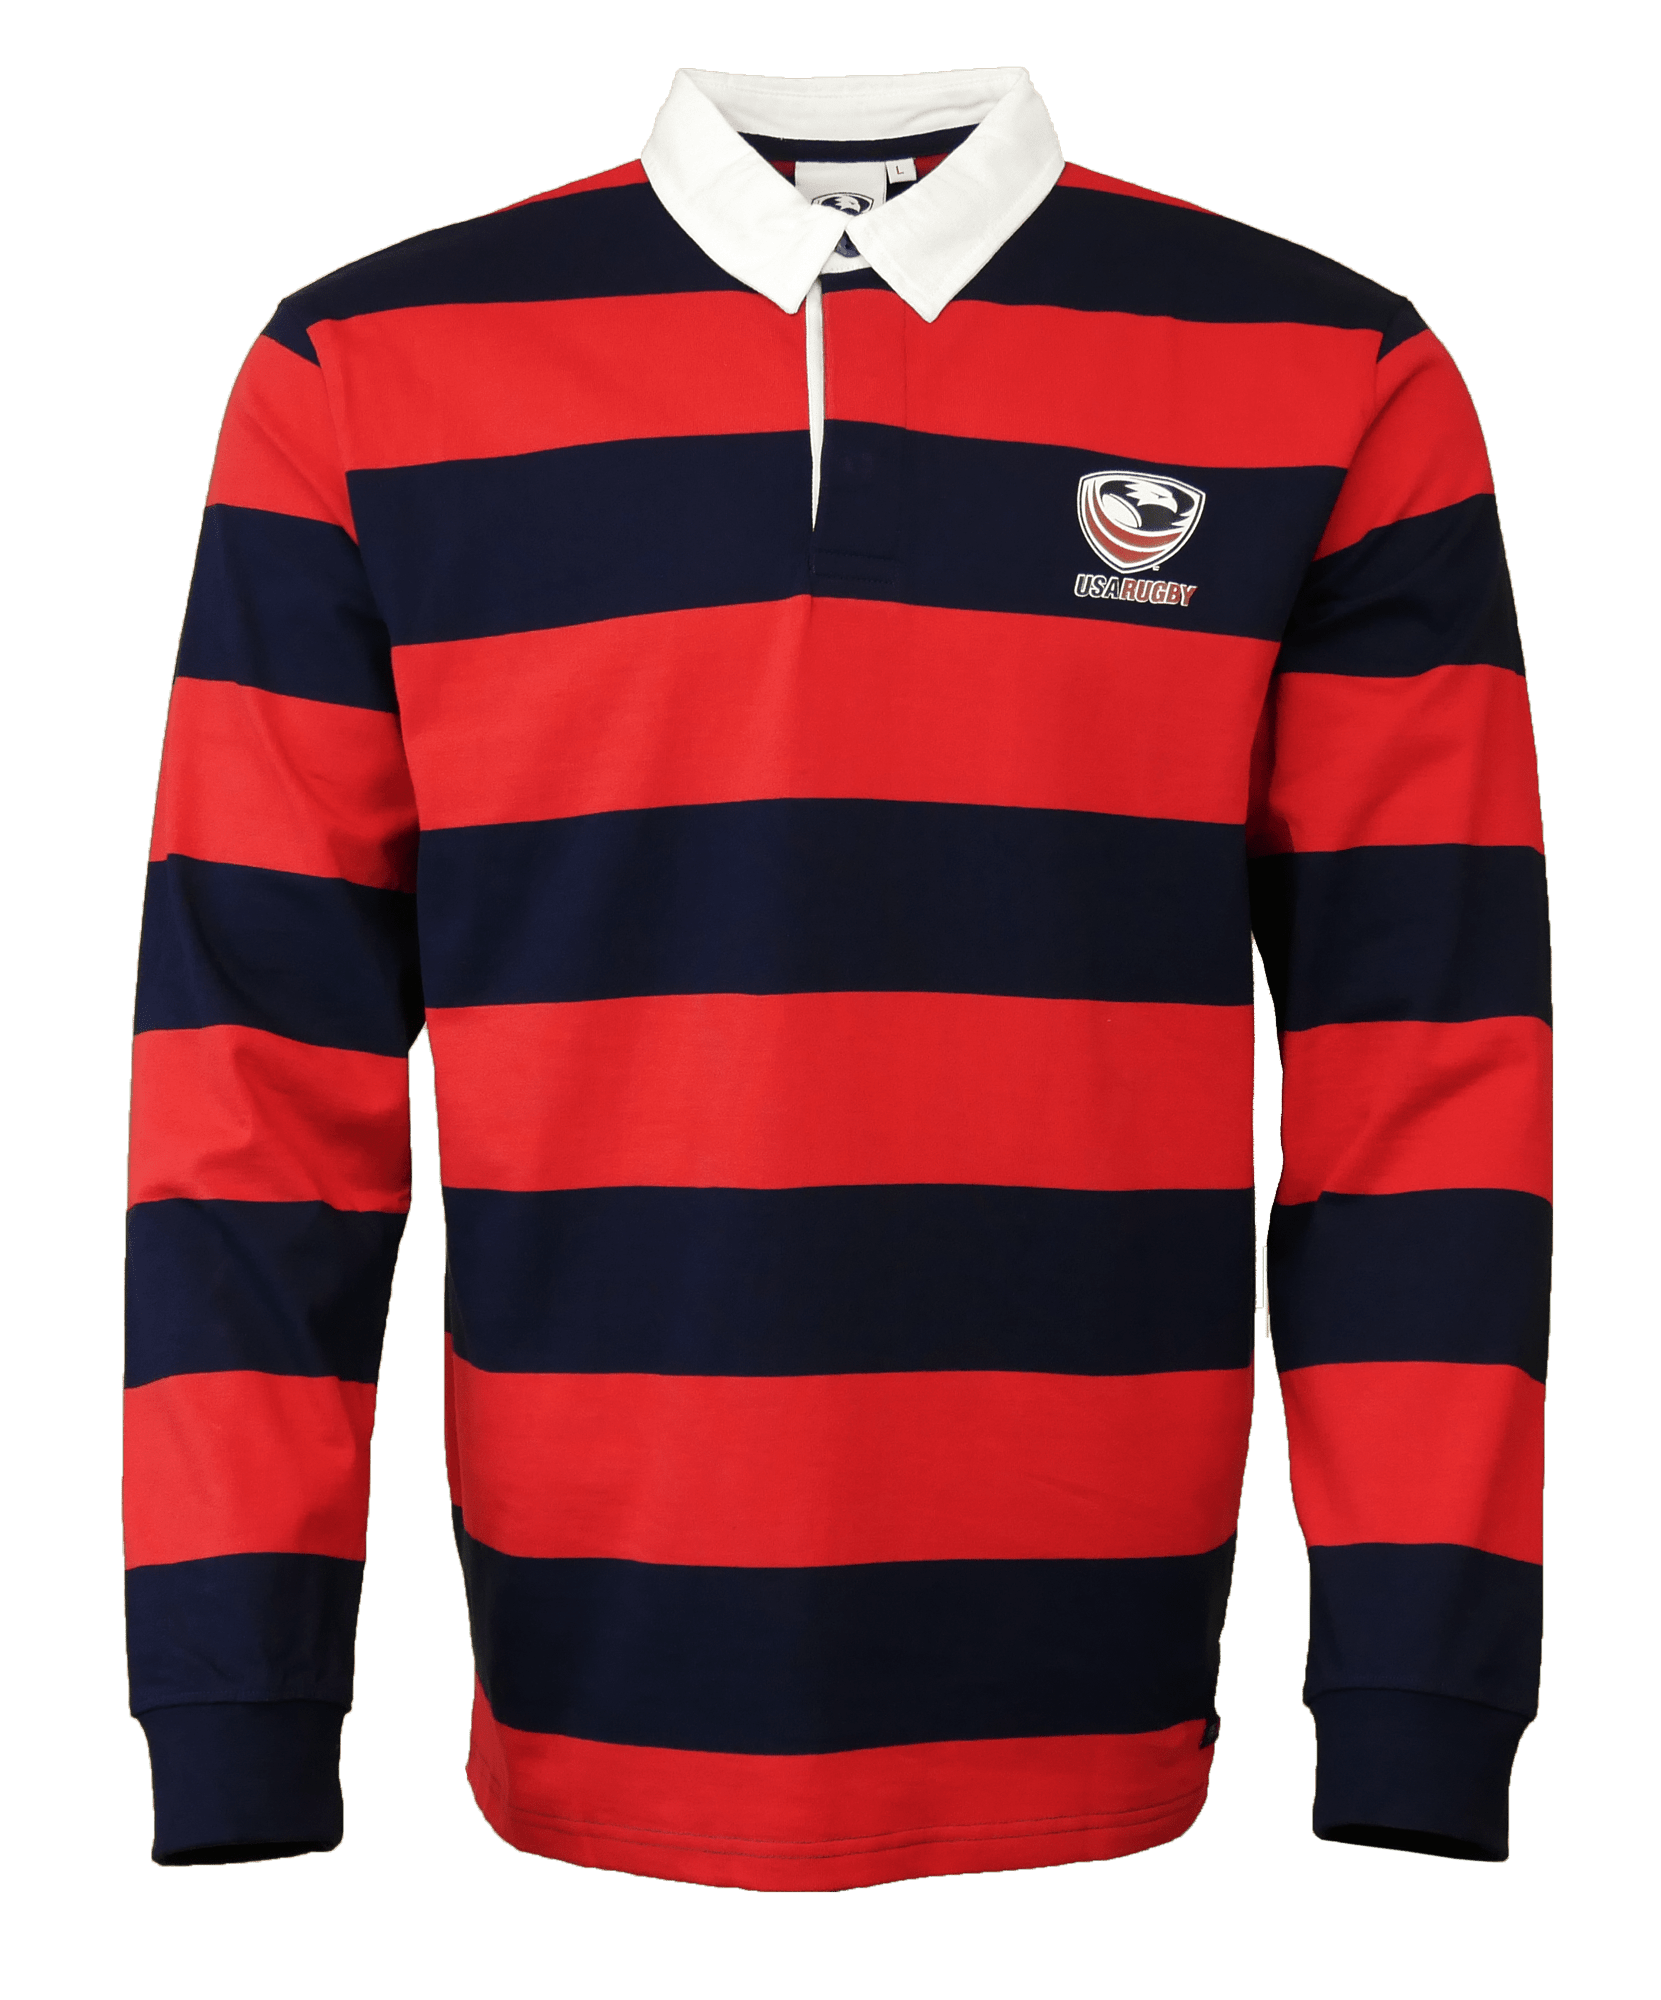 USA Rugby Hooped Classic Jersey World Rugby Shop